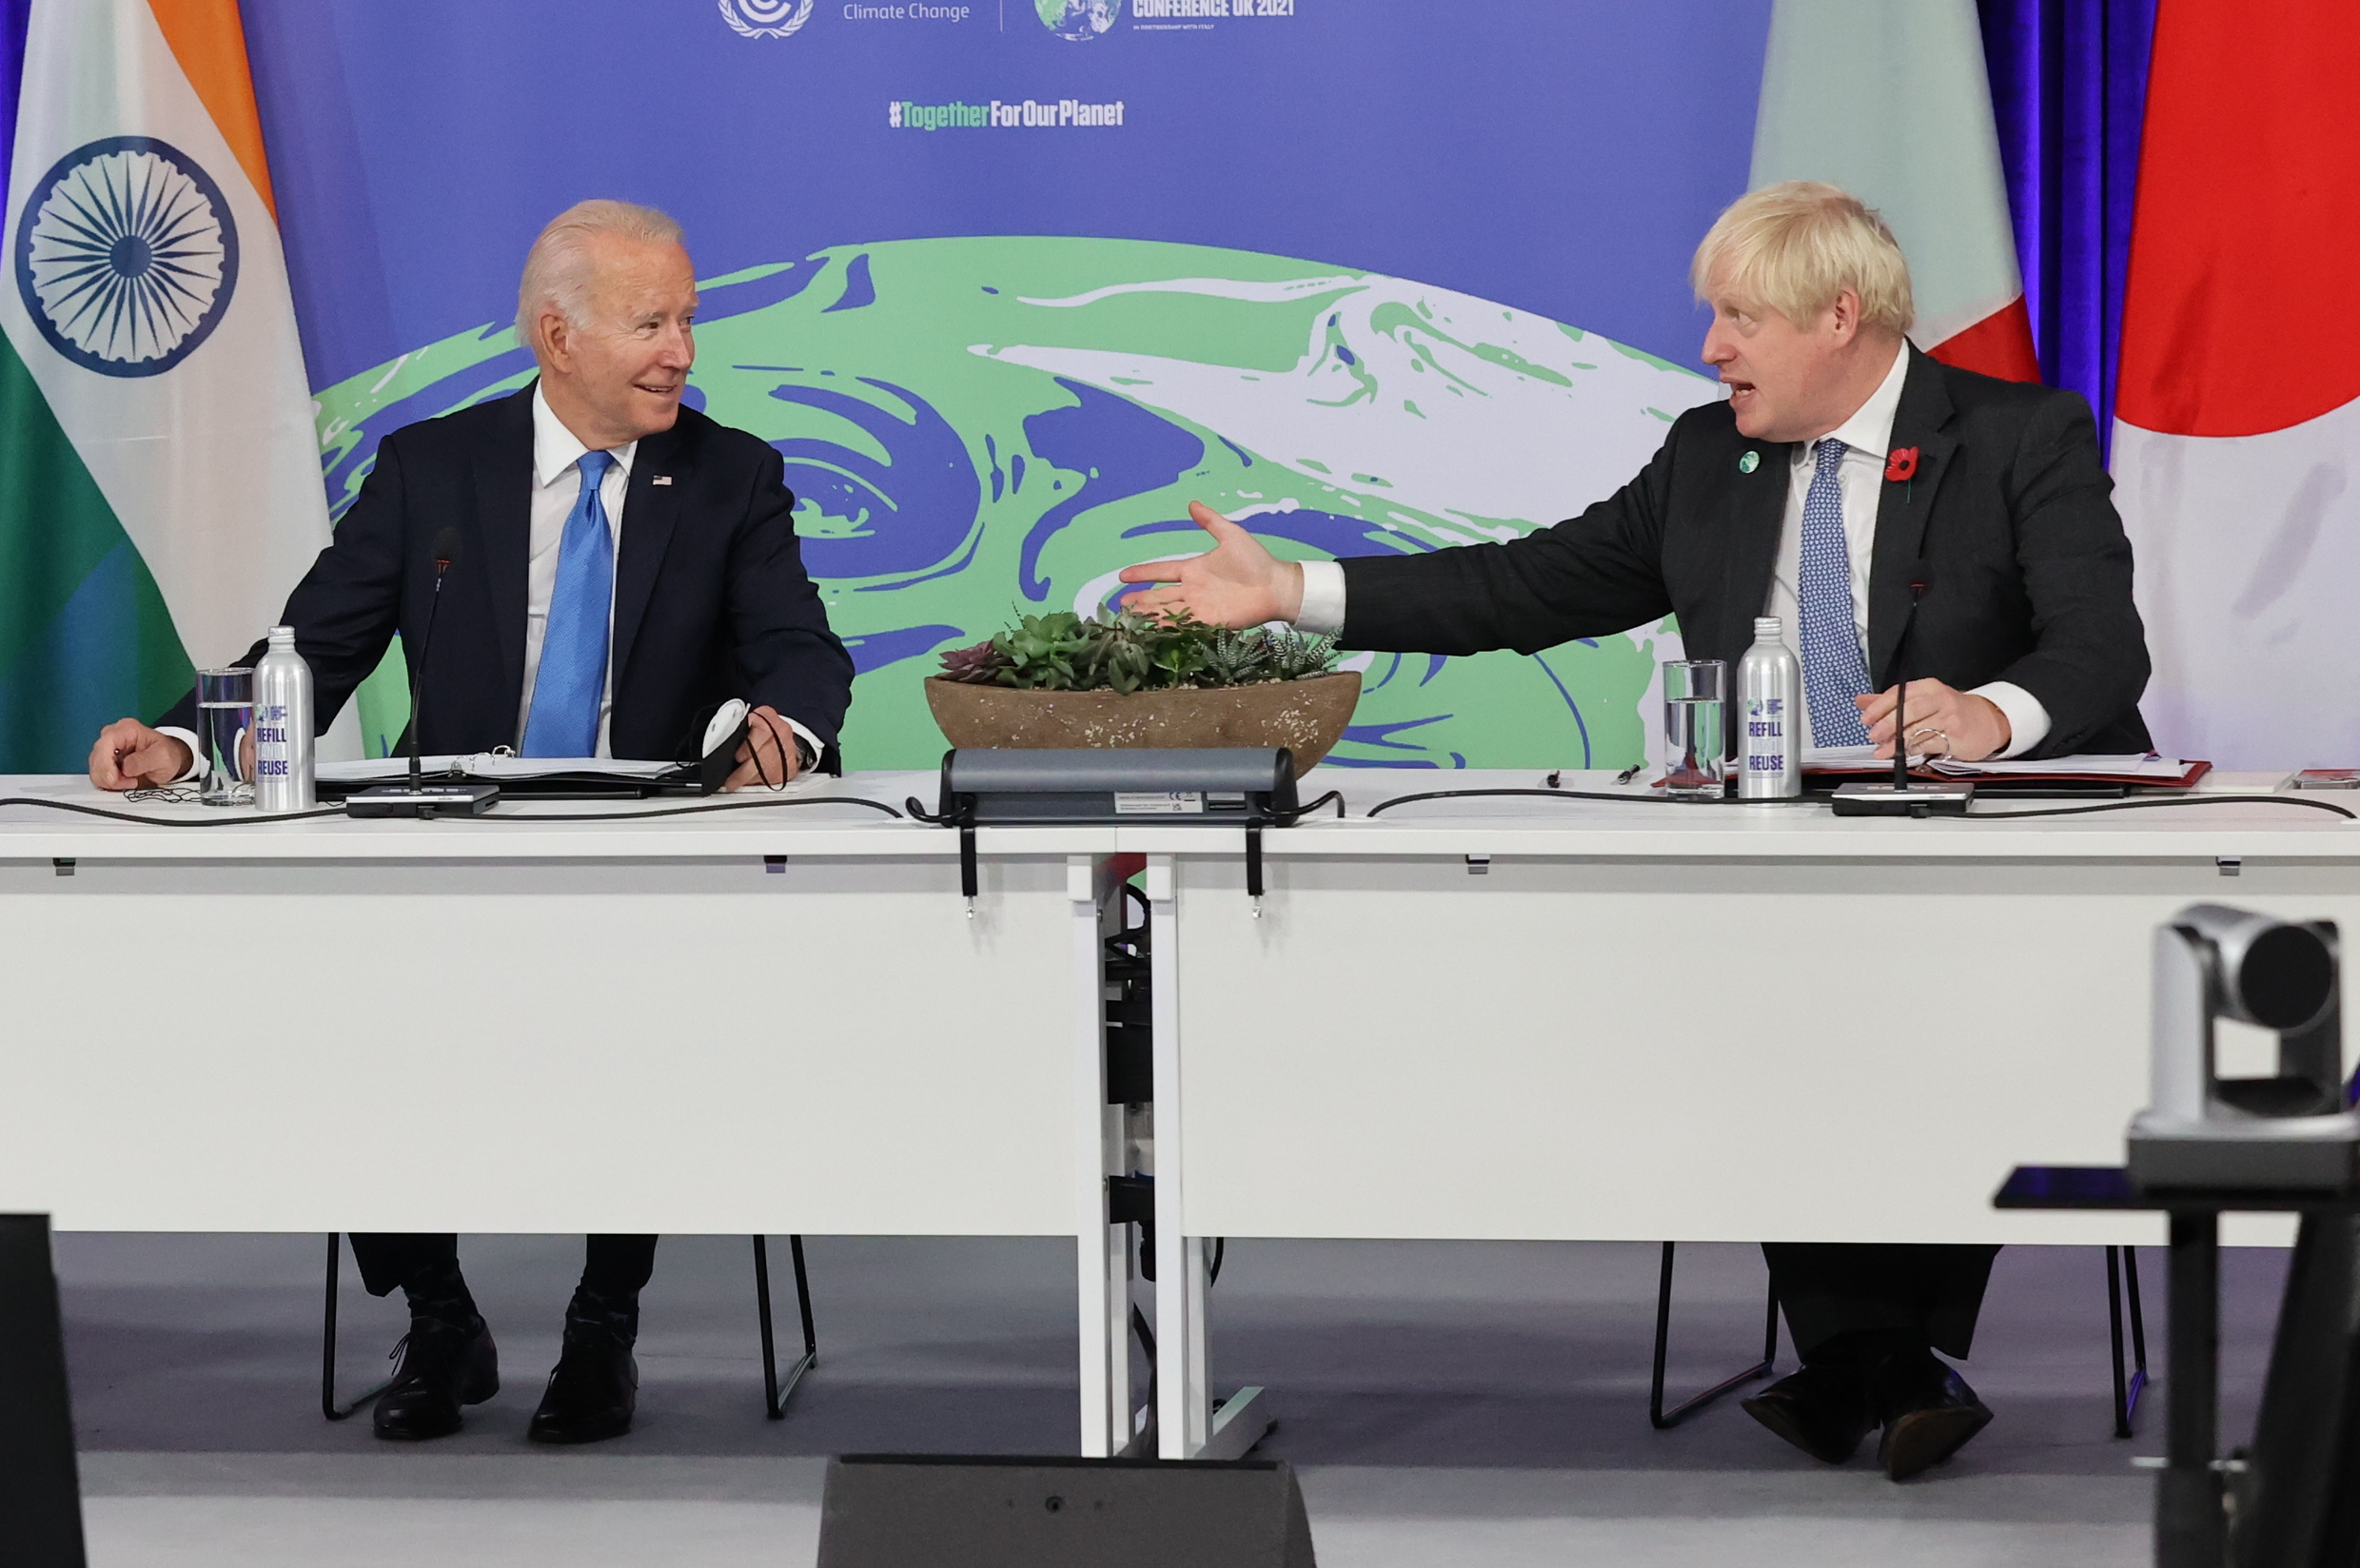 President Joe Biden and British Prime Minister Boris Johnson attend a meeting on Nov. 2 at the United Nations climate conference in Glasgow, United Kingdom. (Steve Reigate/Pool/Getty Images)